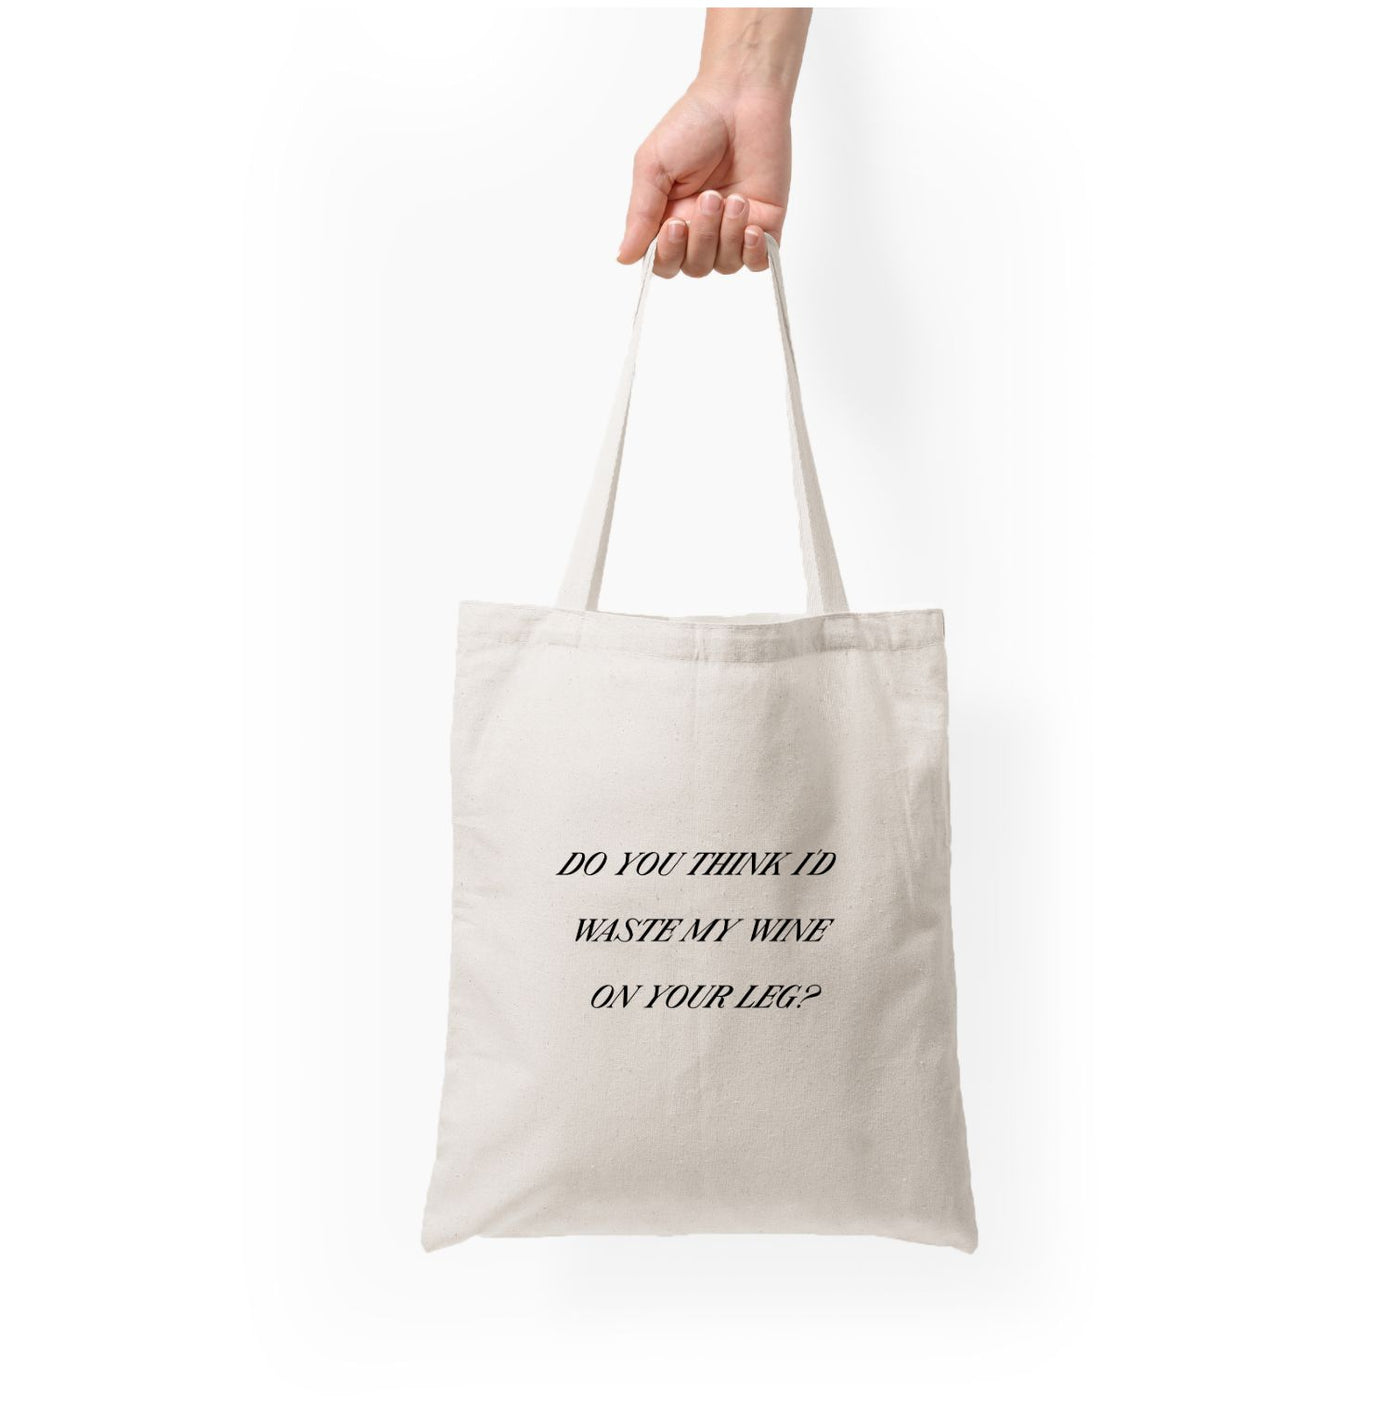 Do You Think I'd Waste My Wine On Your Leg? - Islanders Tote Bag